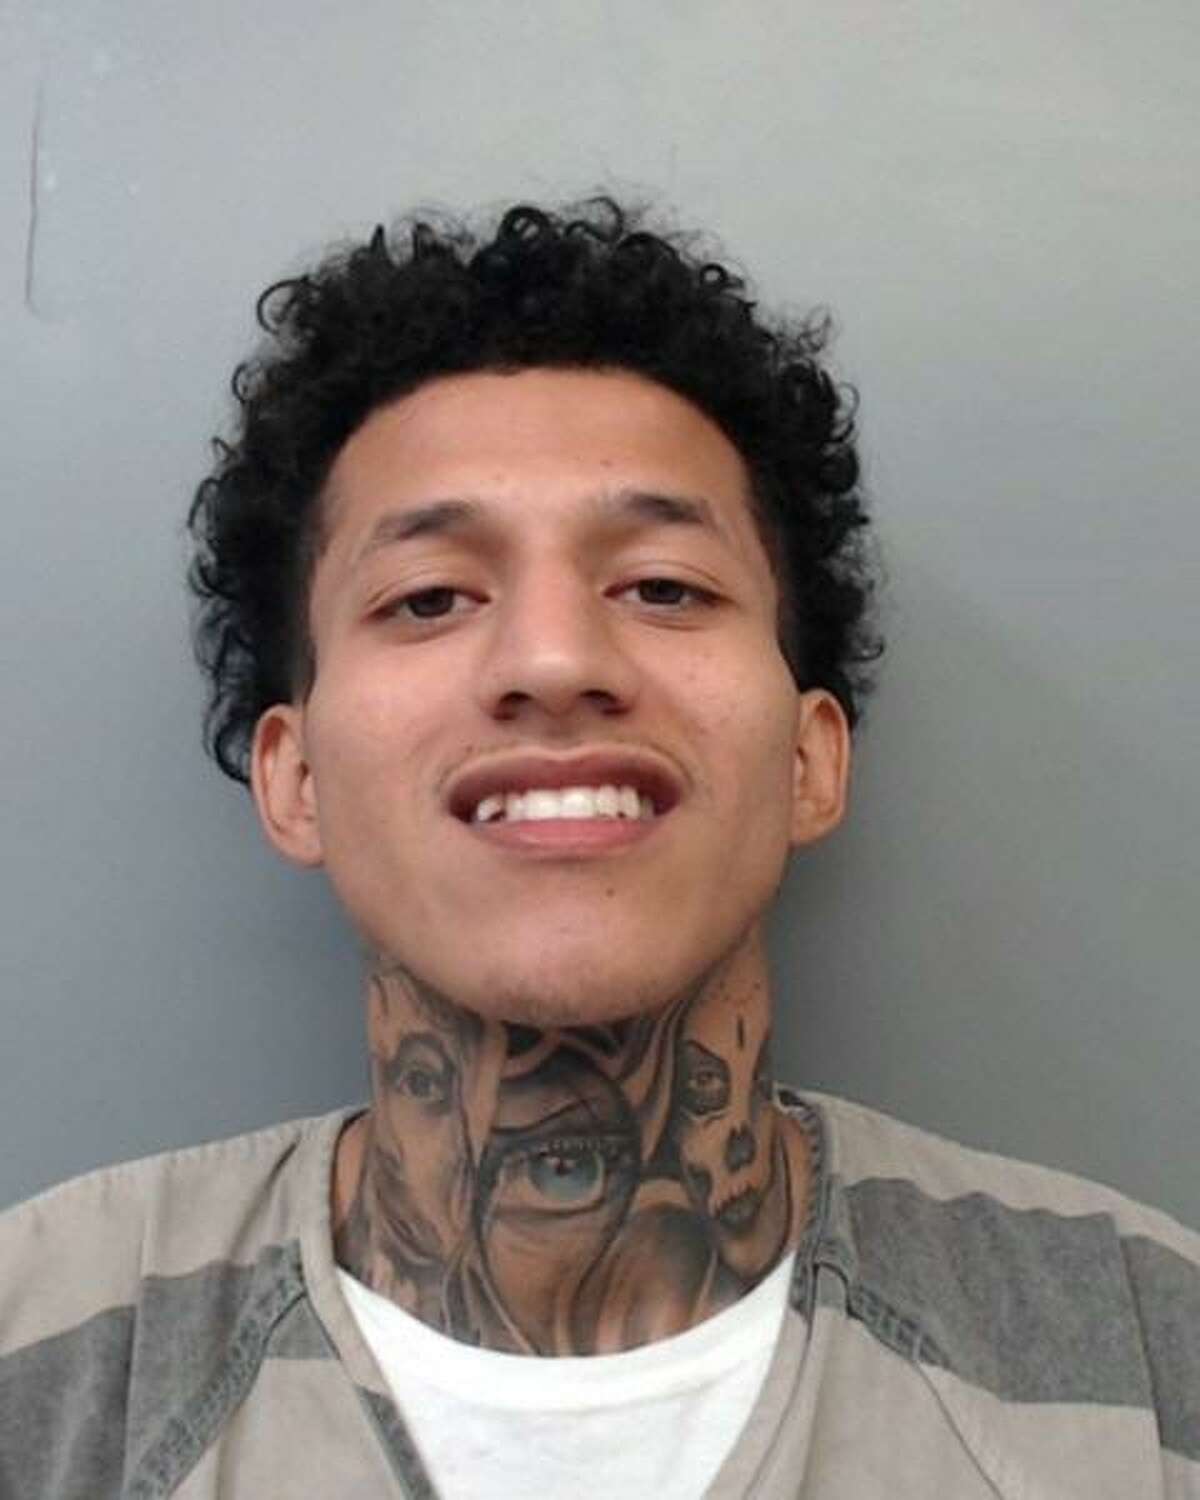 Ricardo Eduardo Garcia, 21, also known as “Goofy,” was charged with aggravated assault with a deadly weapon.